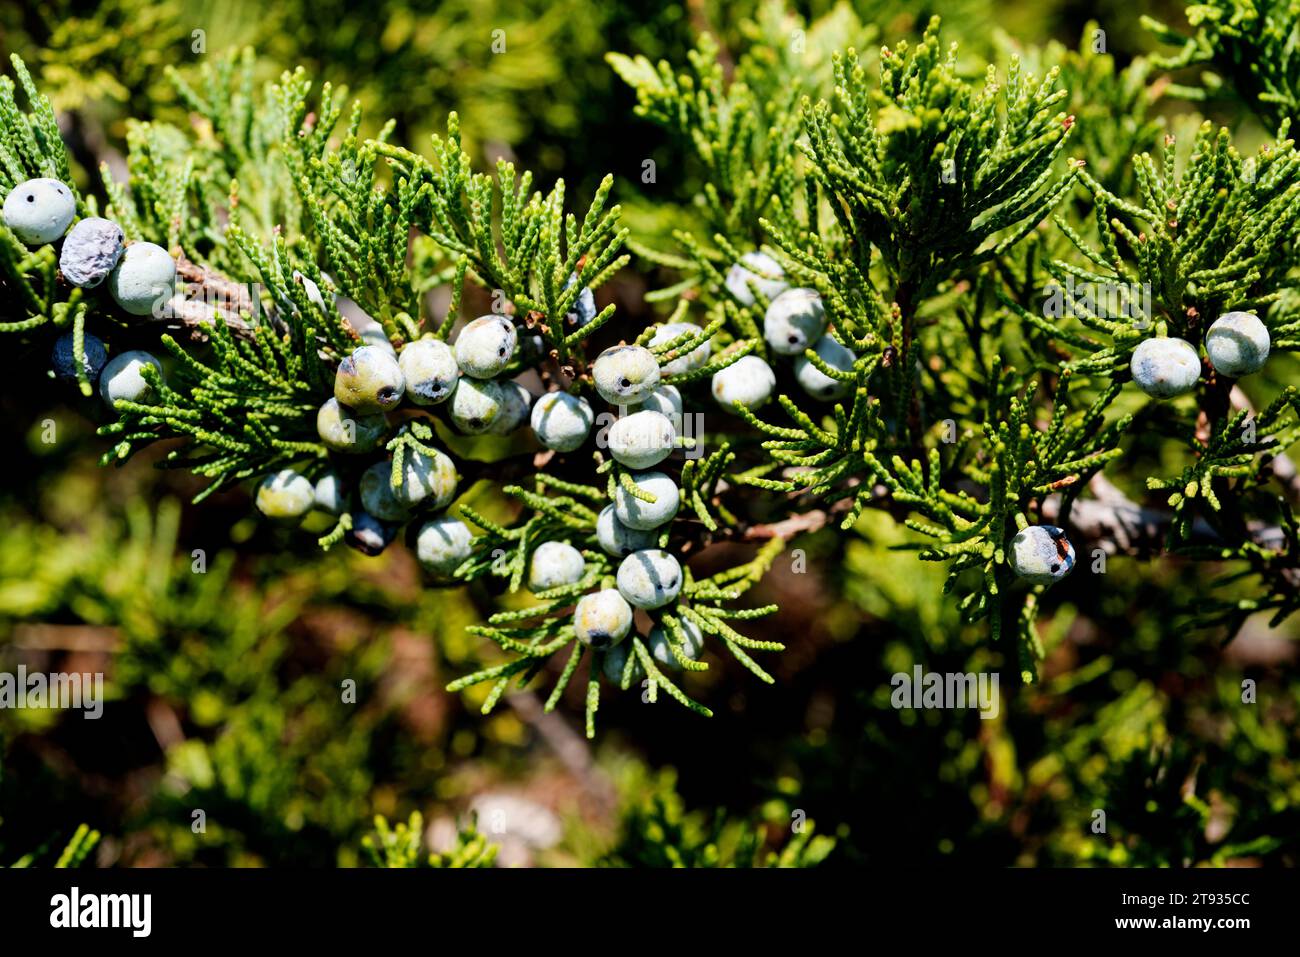 Savin juniper (Juniperus sabina) is a poisonous prostrate shrub native to south Europe mountains. Cones and scale-leaves detail. This photo was taken Stock Photo